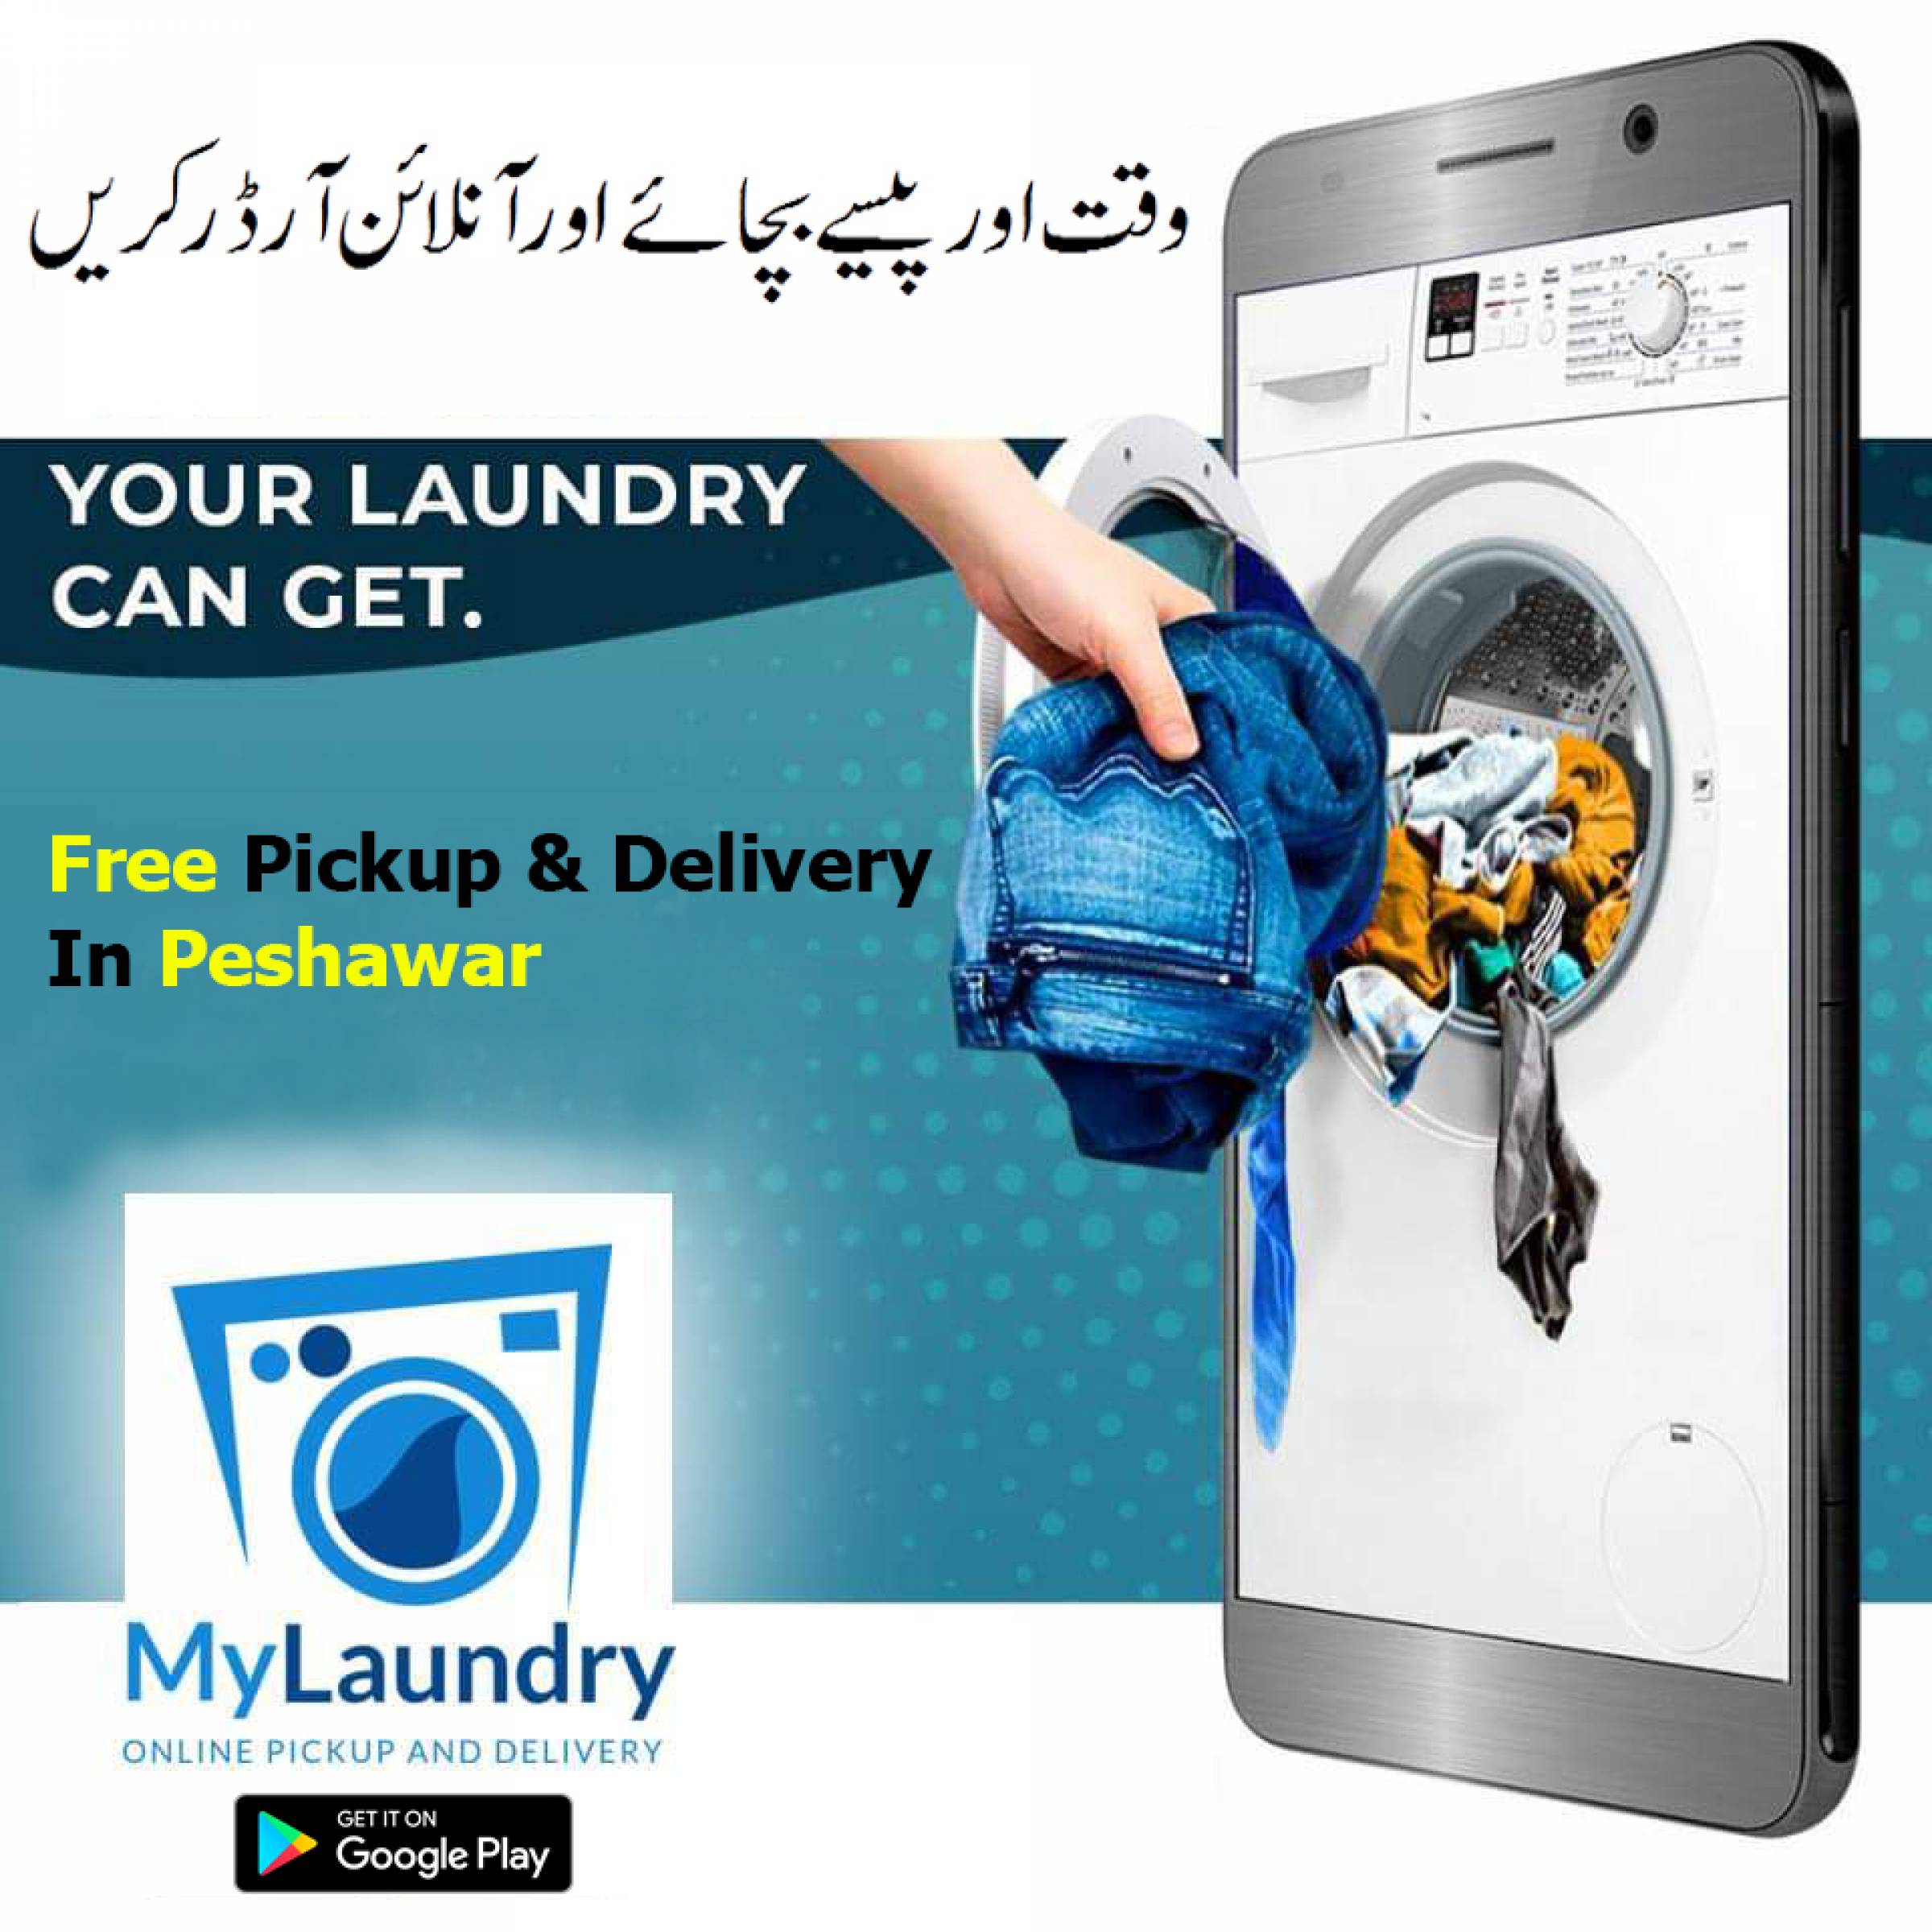 MyLaundry - Free Pickup & Delivery In Peshawar